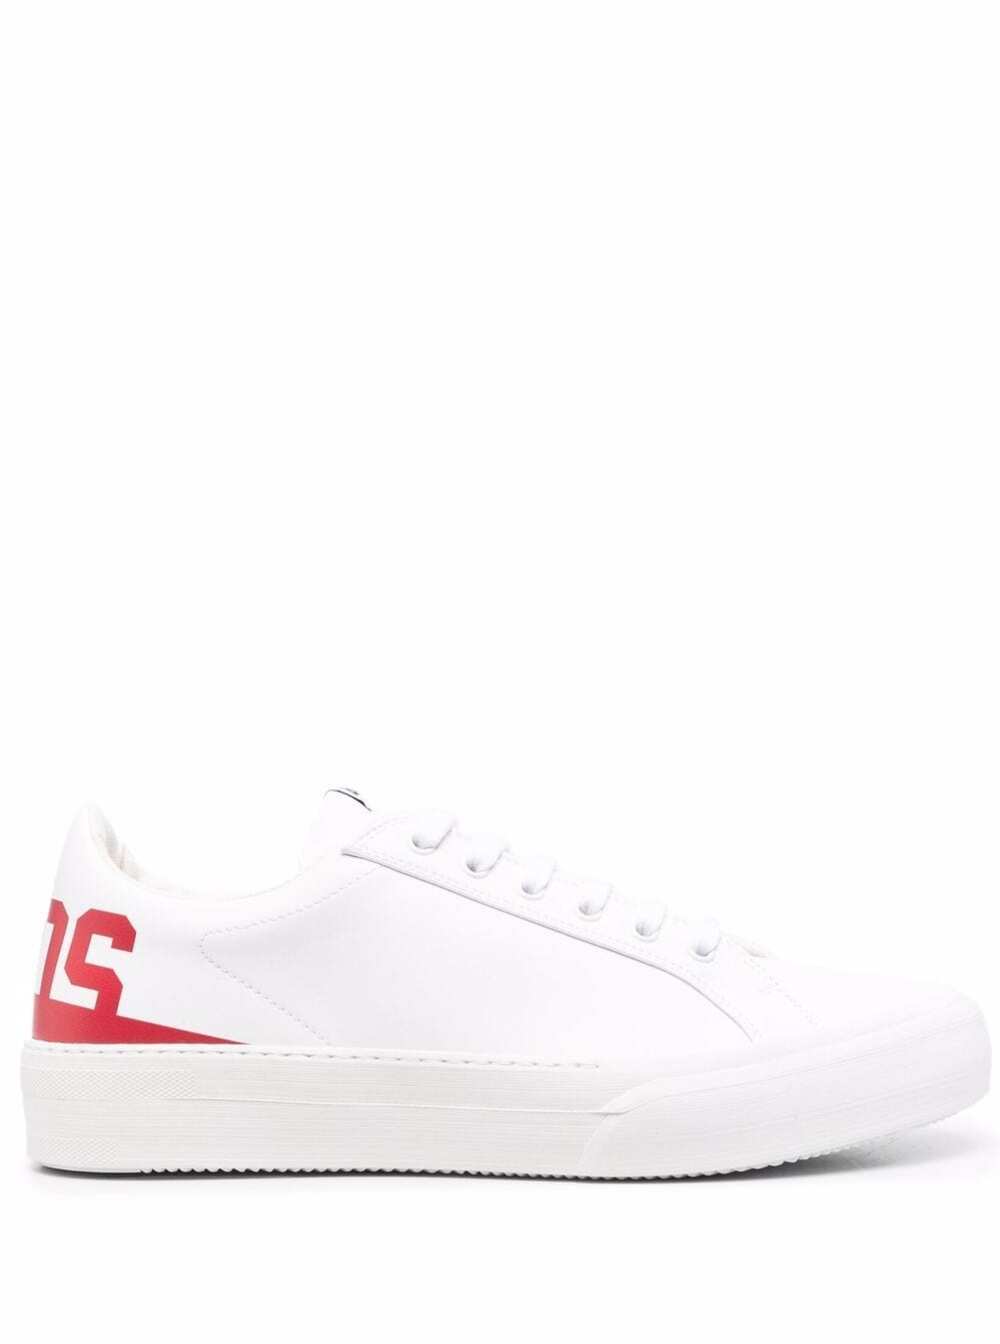 Gcds Man s White Leather Sneakers With Logo